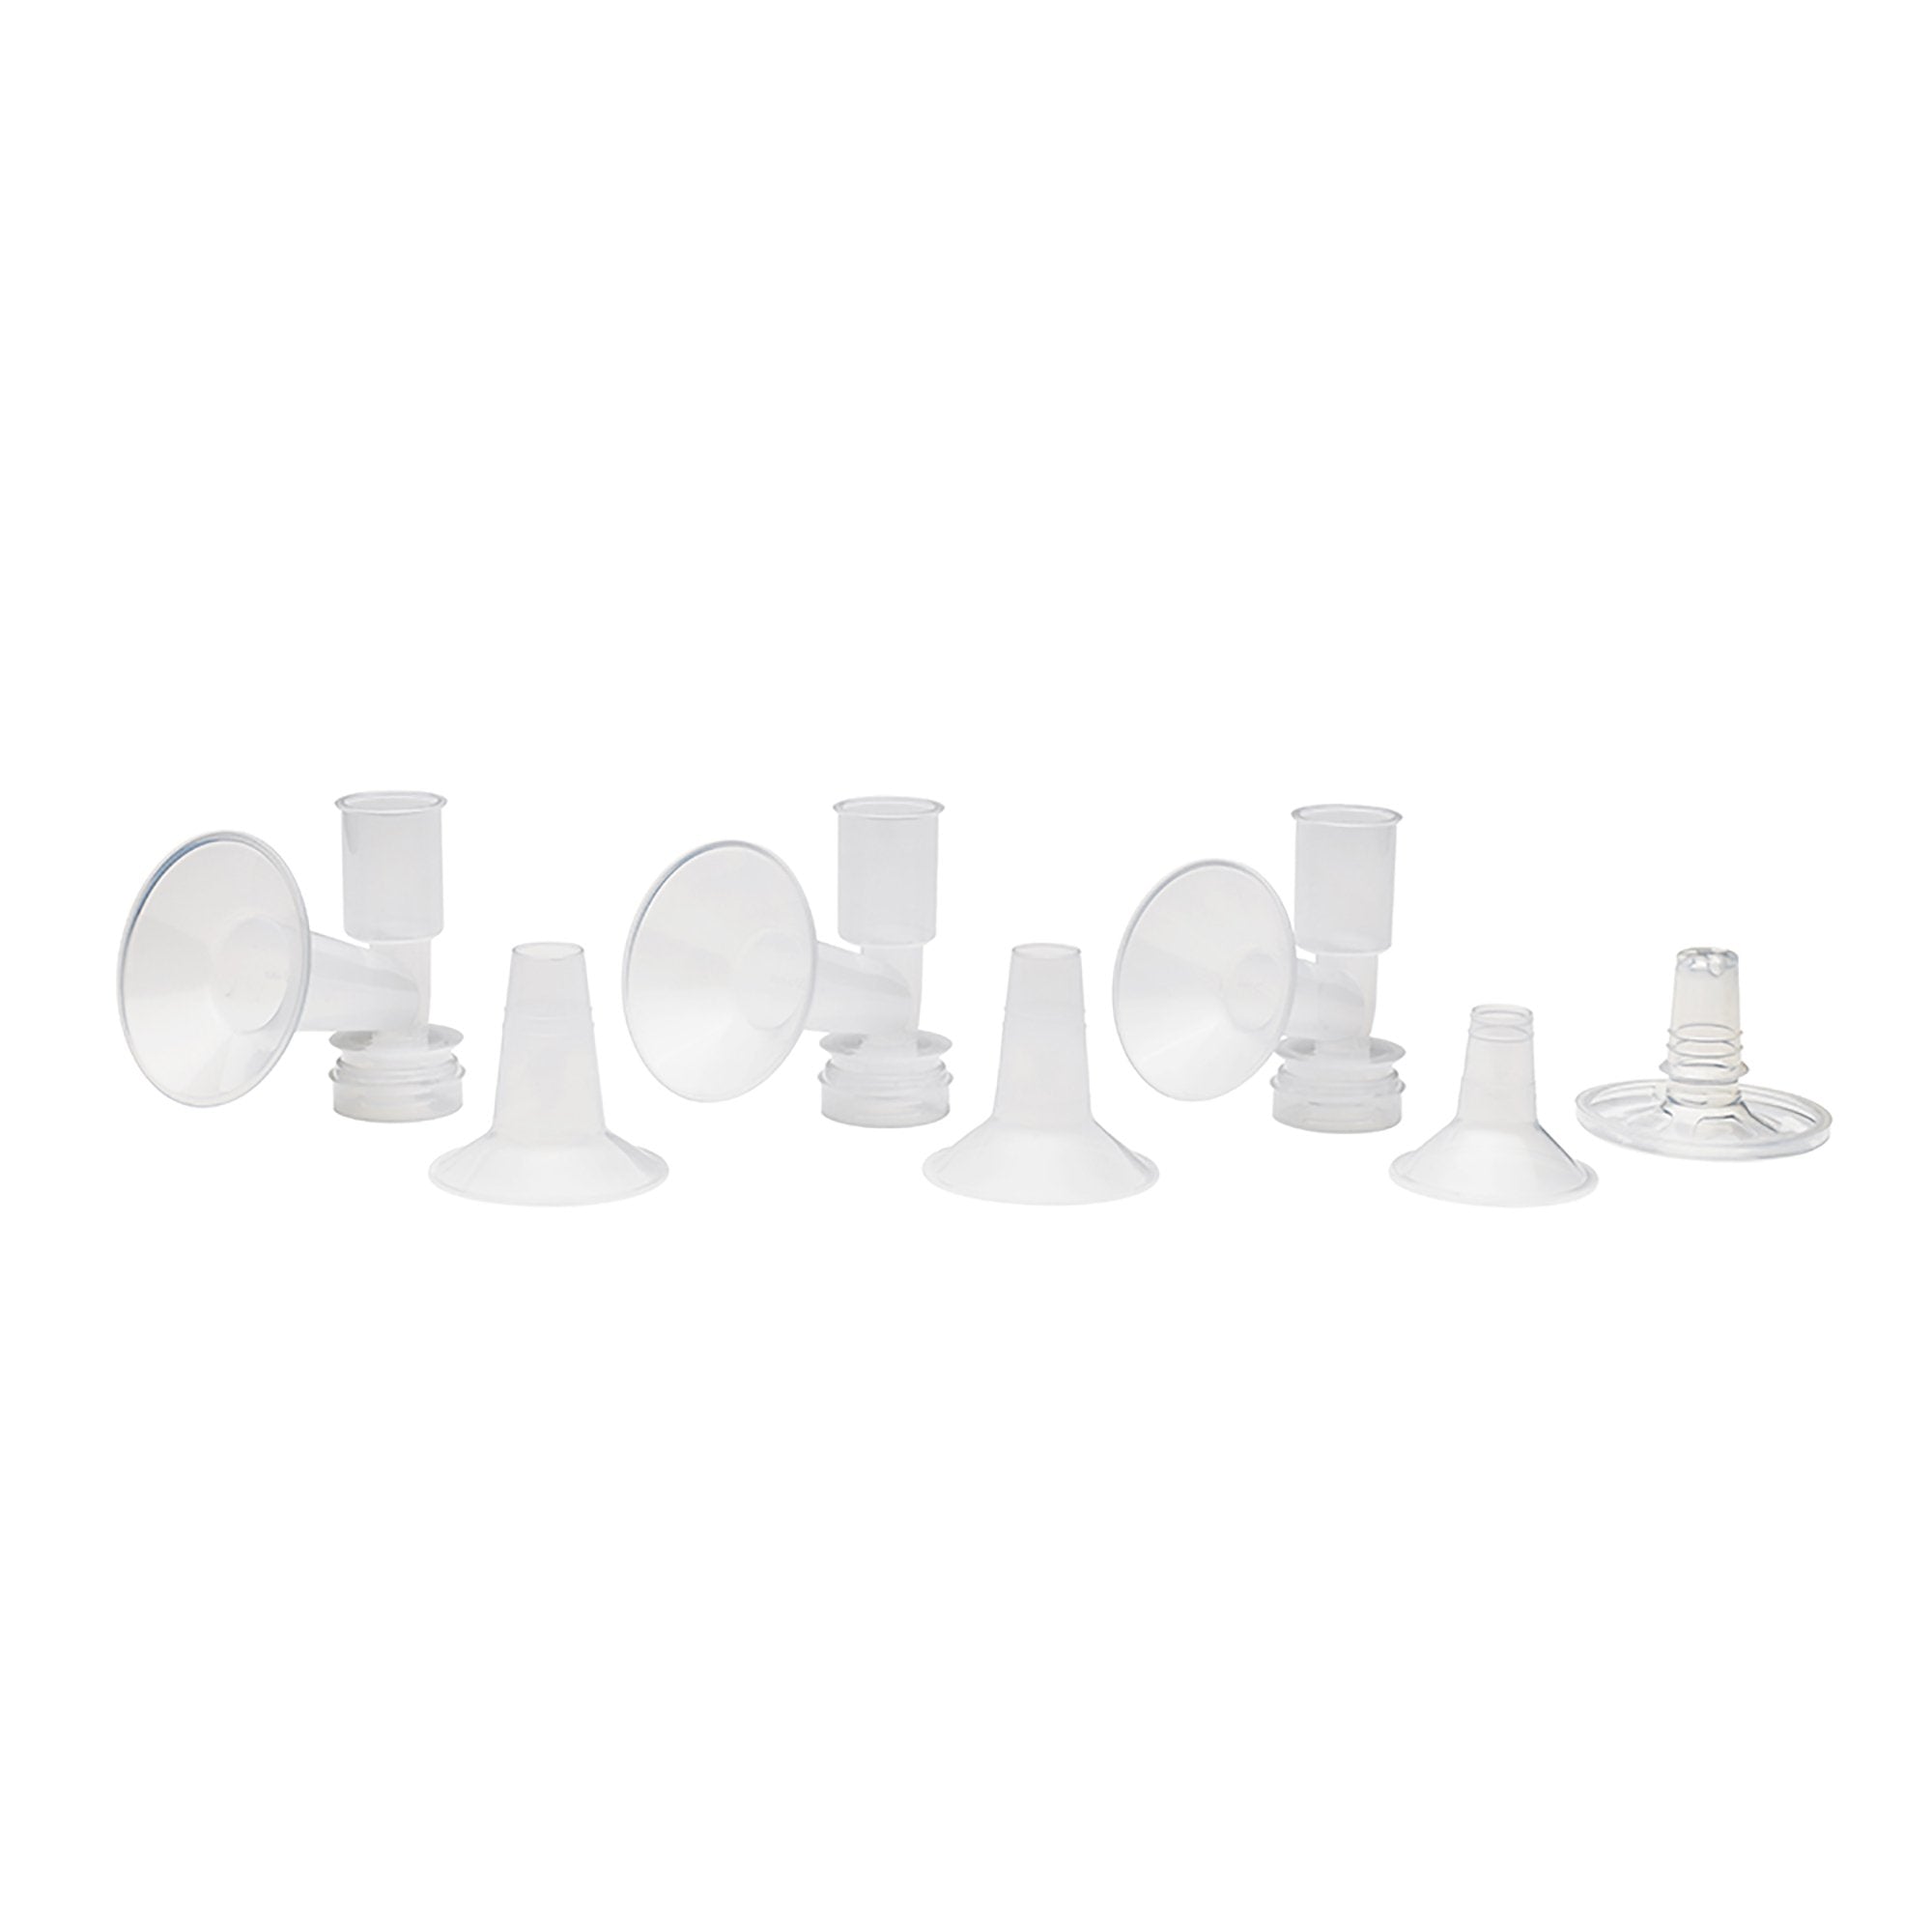 Areola Stimulator Ameda® Flexishield For Ameda HygieniKit Milk Collection Systems and Purely Yours, Finesse, Platinum, Elite, Hygeia, Lansinoh Original Double Pump Flanges, Bailey Nurture III Flanges and Medela Standard Size Breast Shields